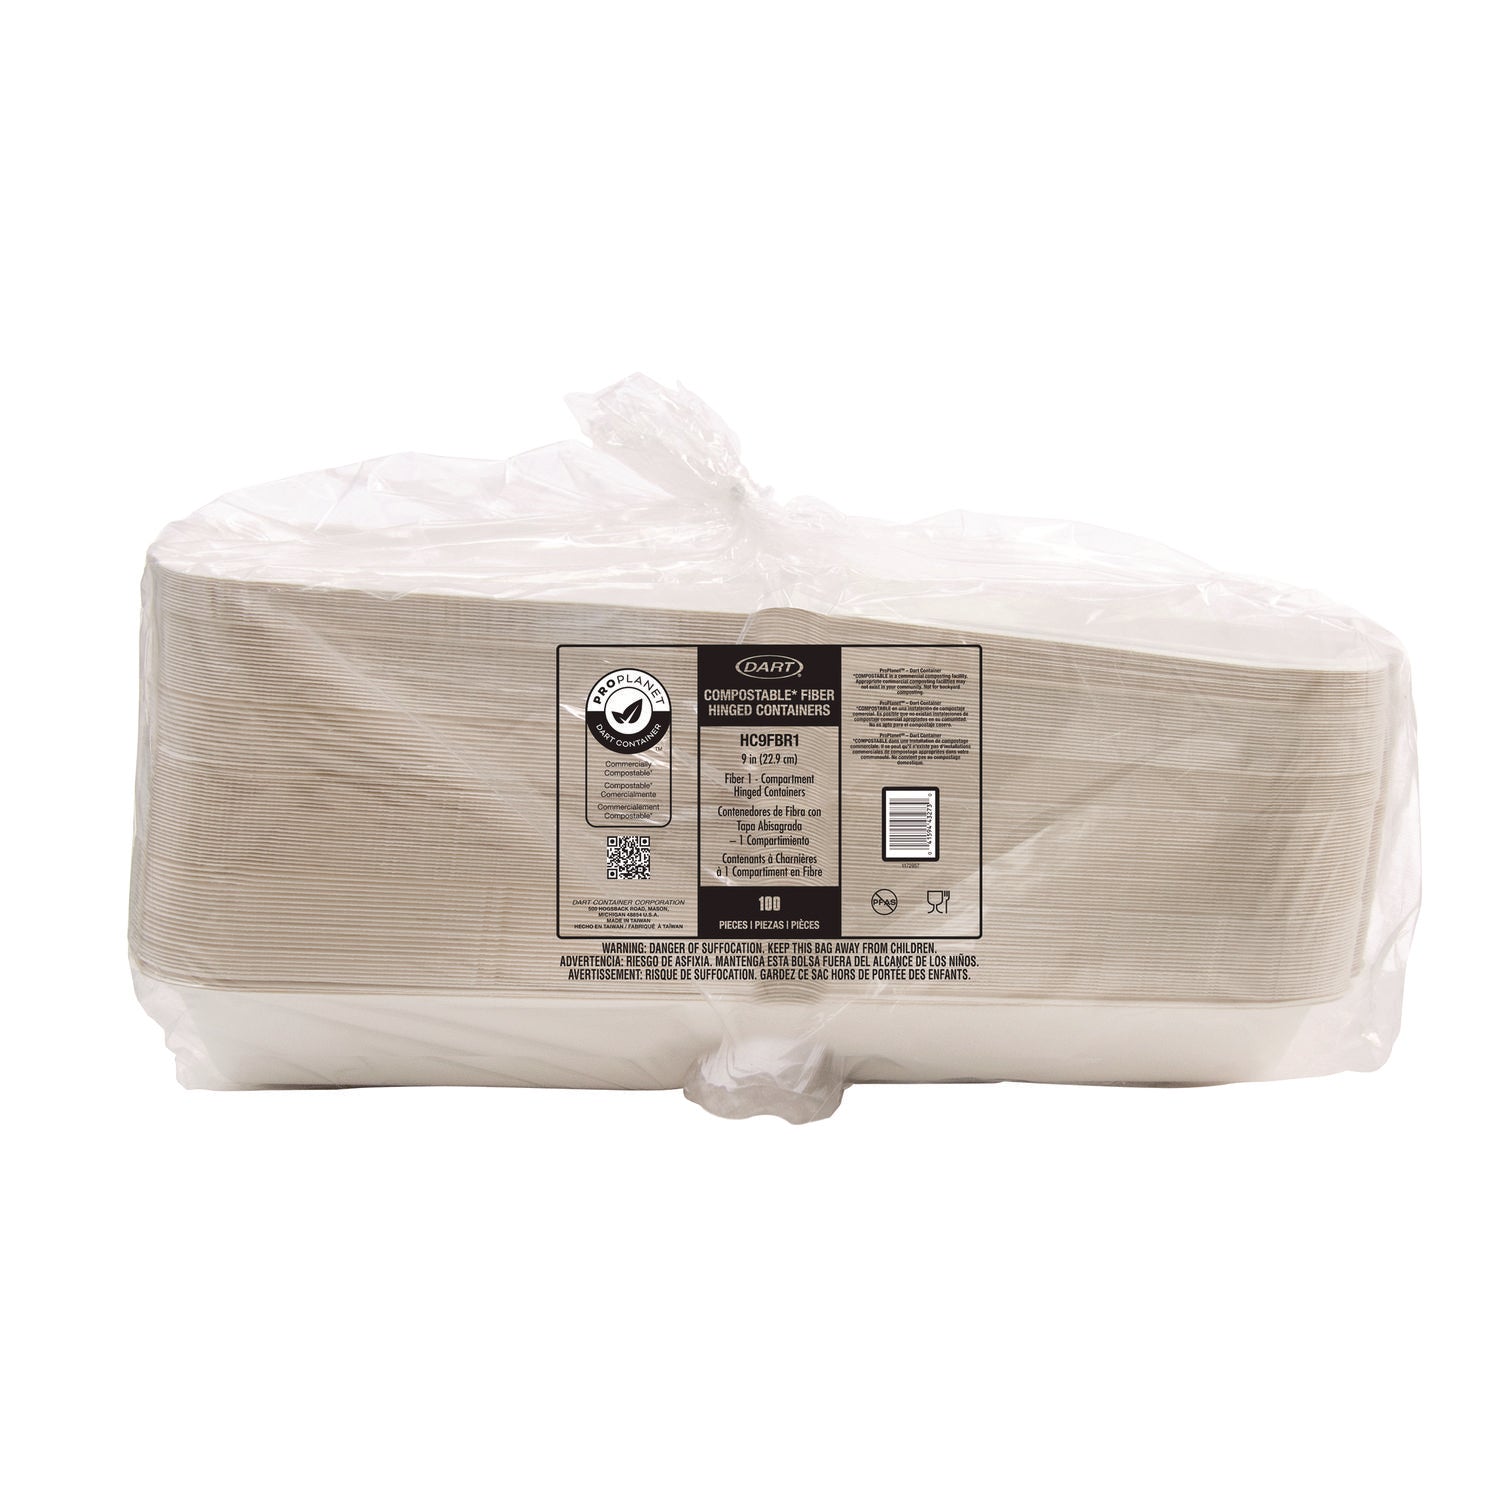 compostable-fiber-hinged-trays-proplanet-seal-898-x-935-x-217-ivory-molded-fiber-200-carton_dcchc9fbr1 - 5